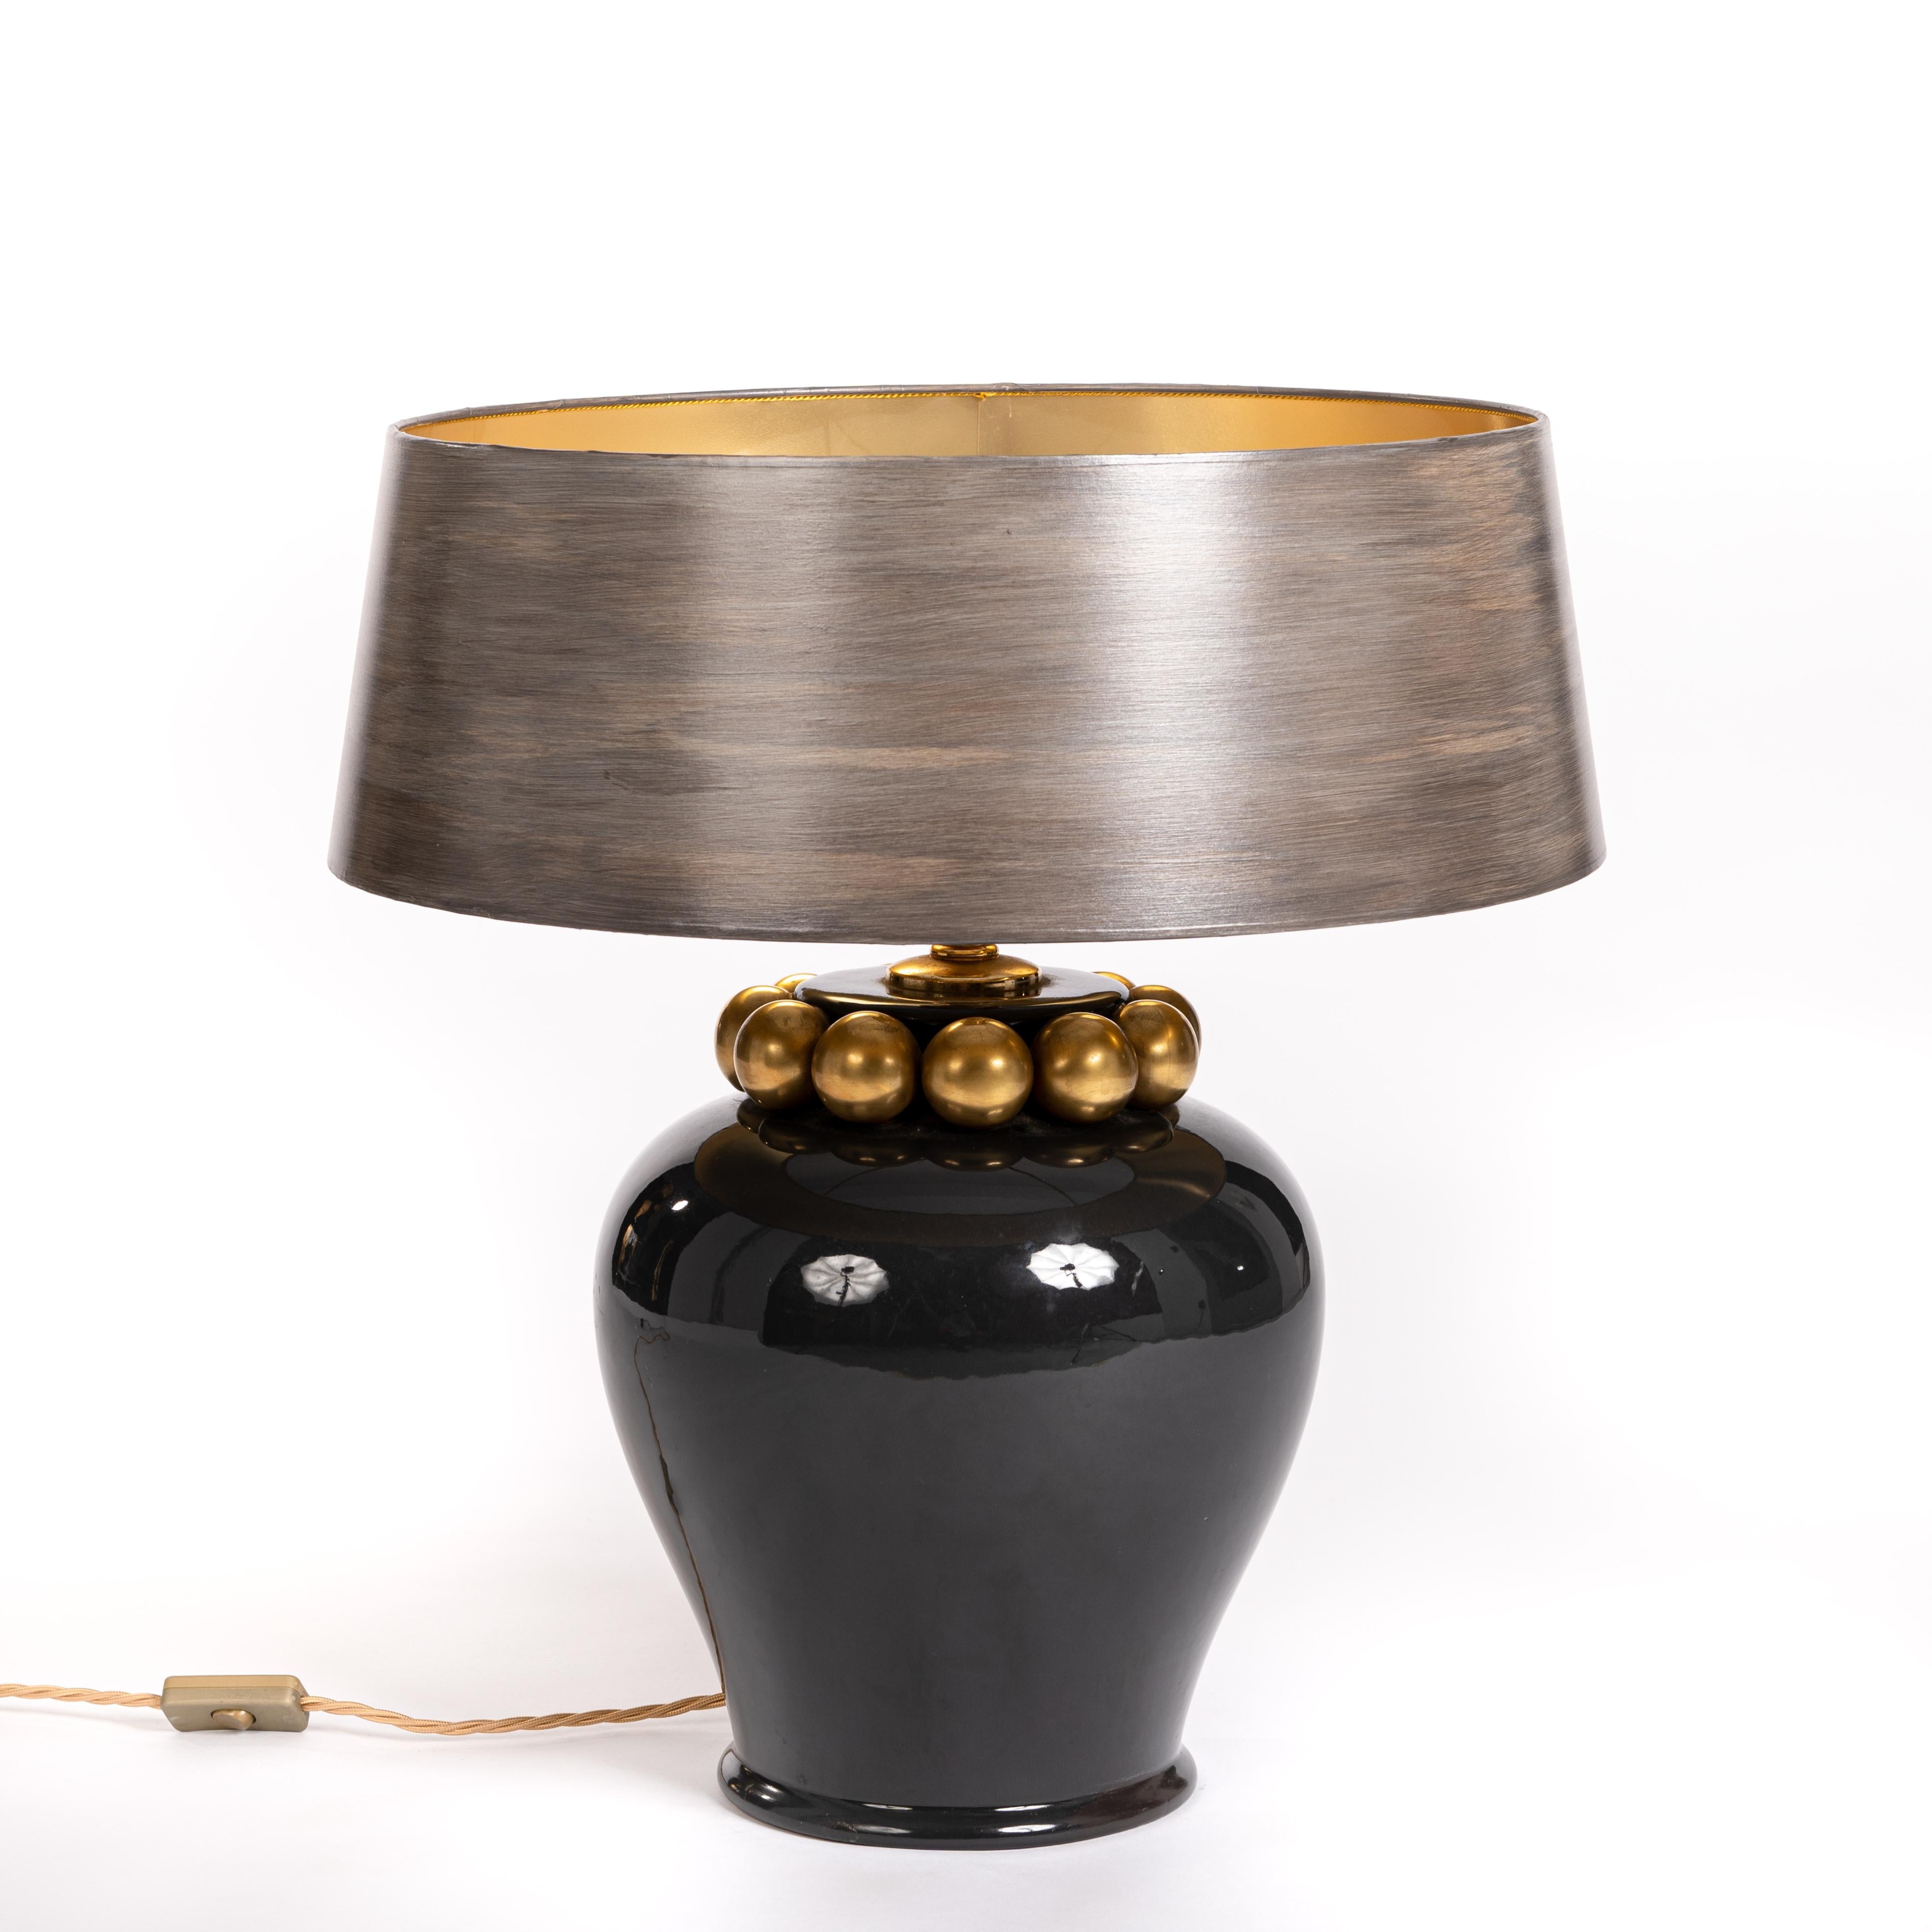 Mid-Century Modern Italian Mid-Cemtury Ceramic Table Lamp in Grey-Gold from the 1950s For Sale